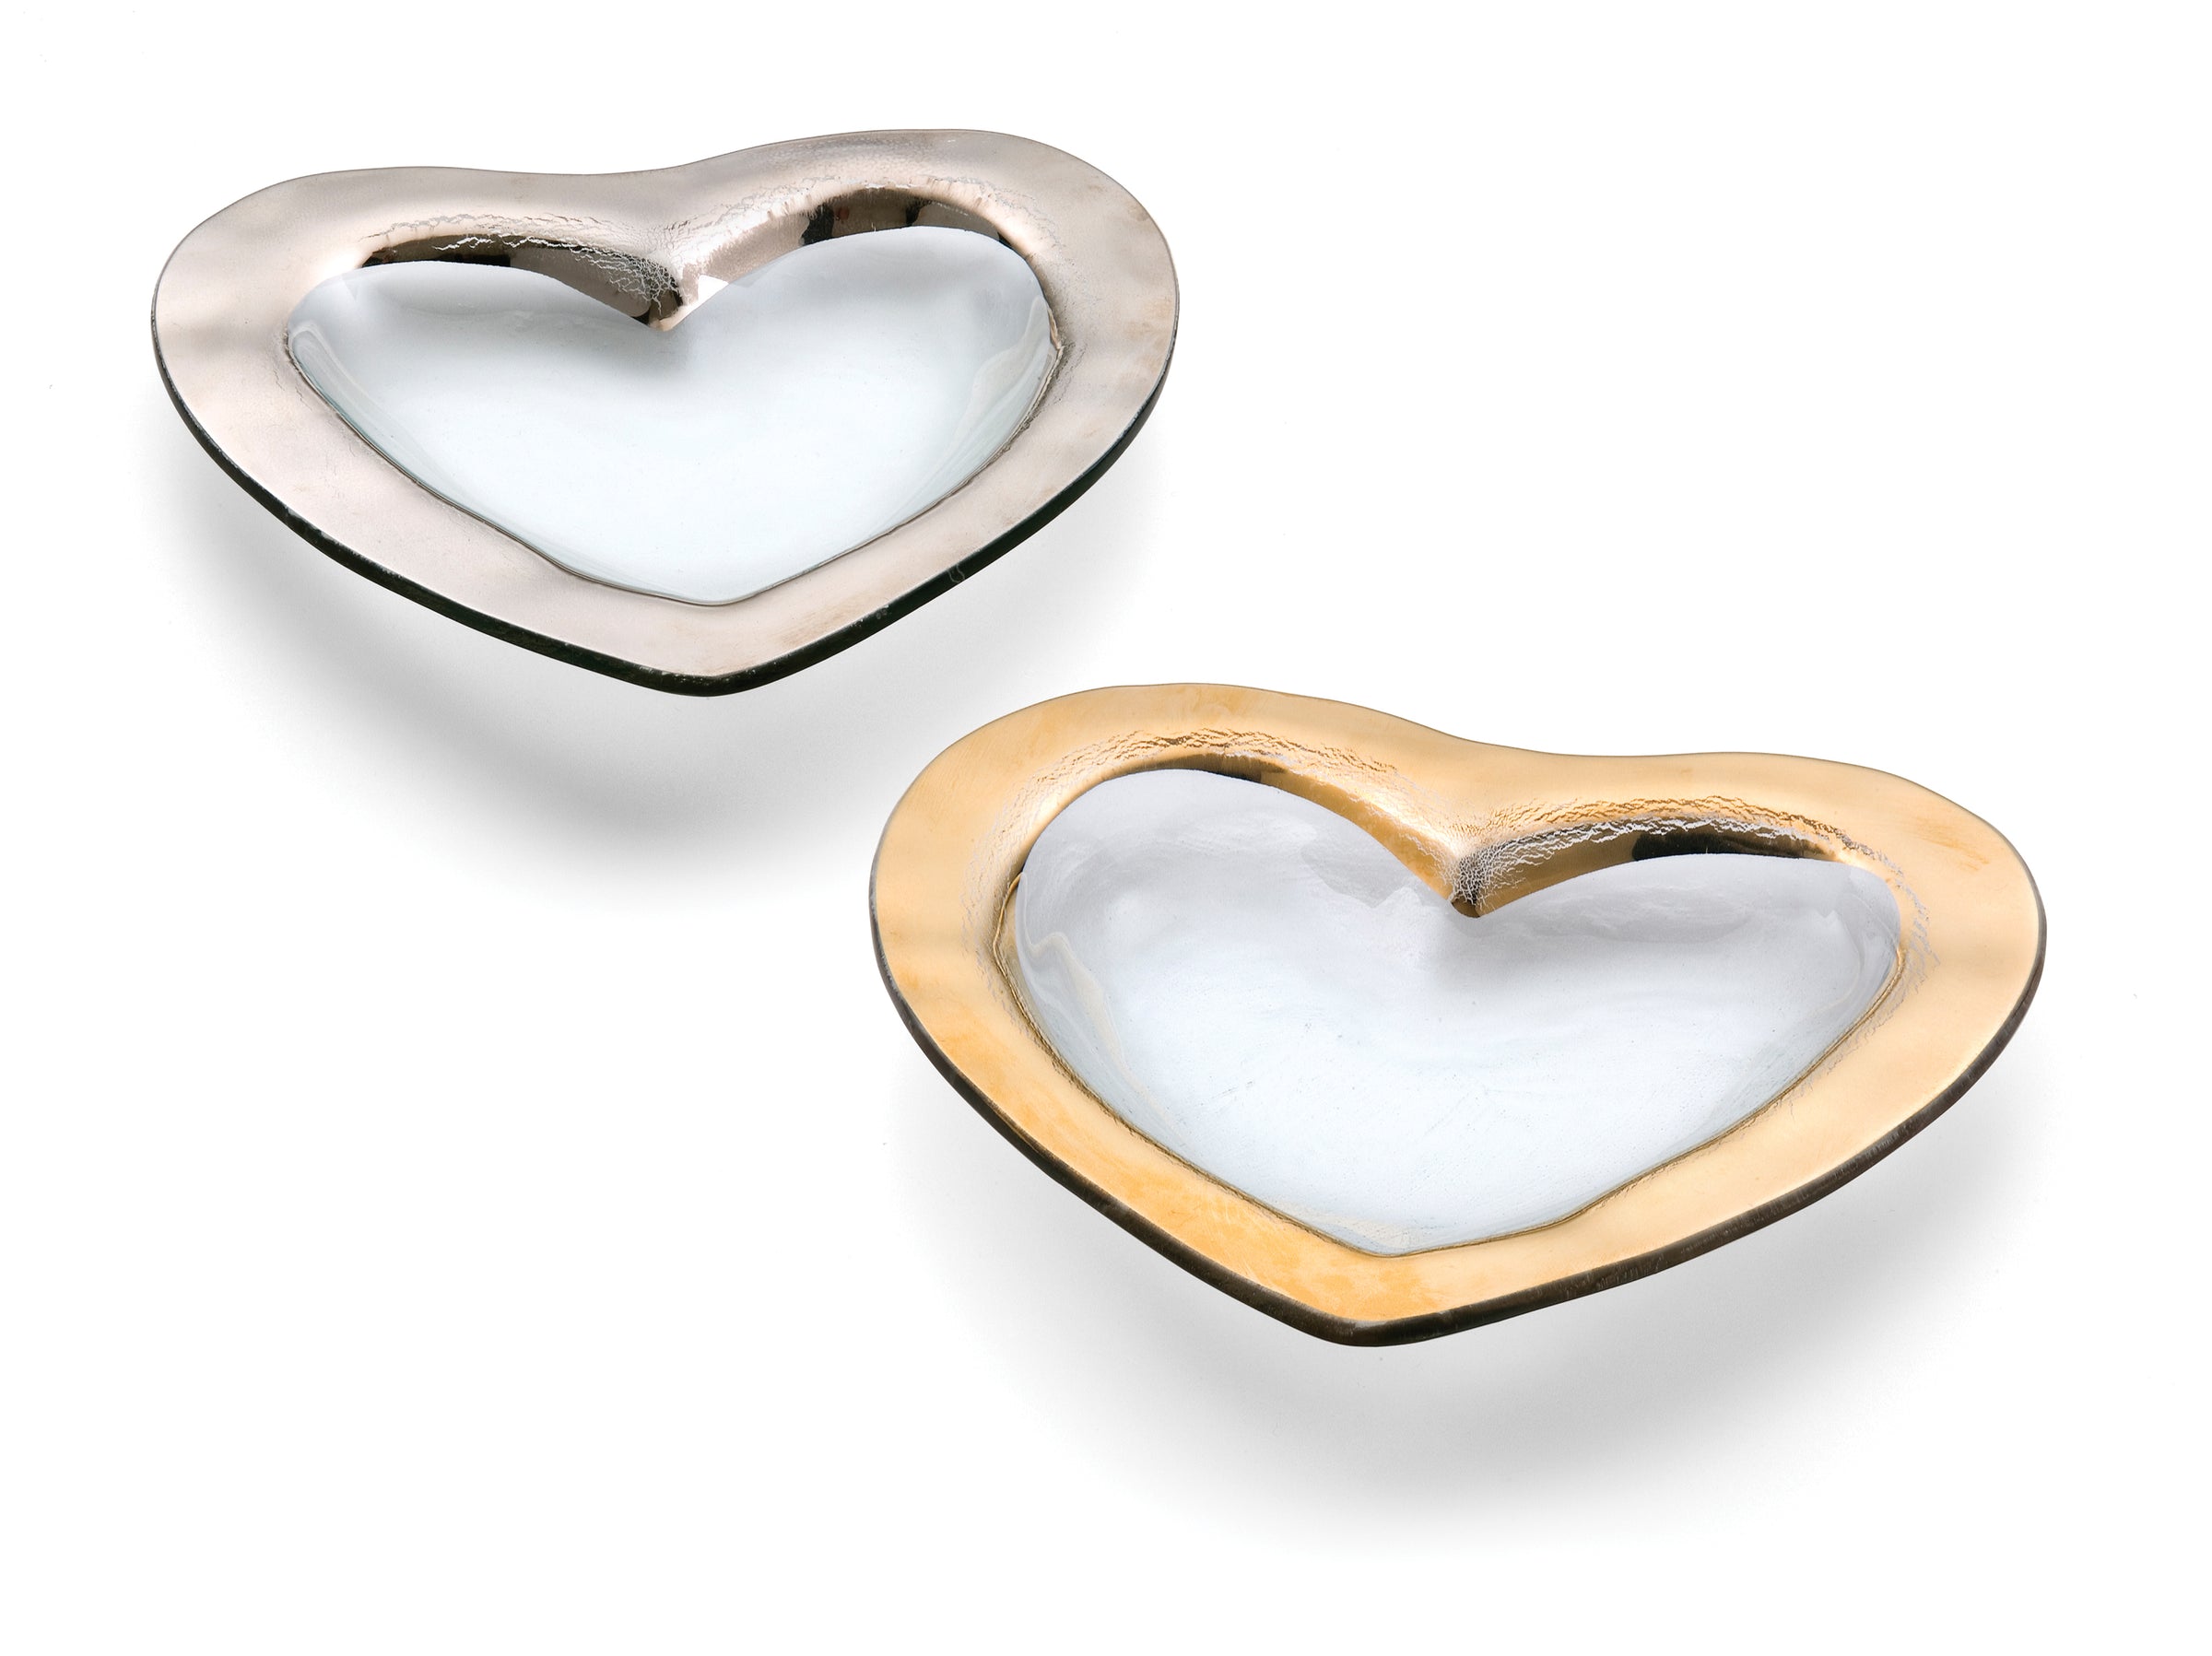 Heart bowls and plates, makes for the perfect heartfelt gifts